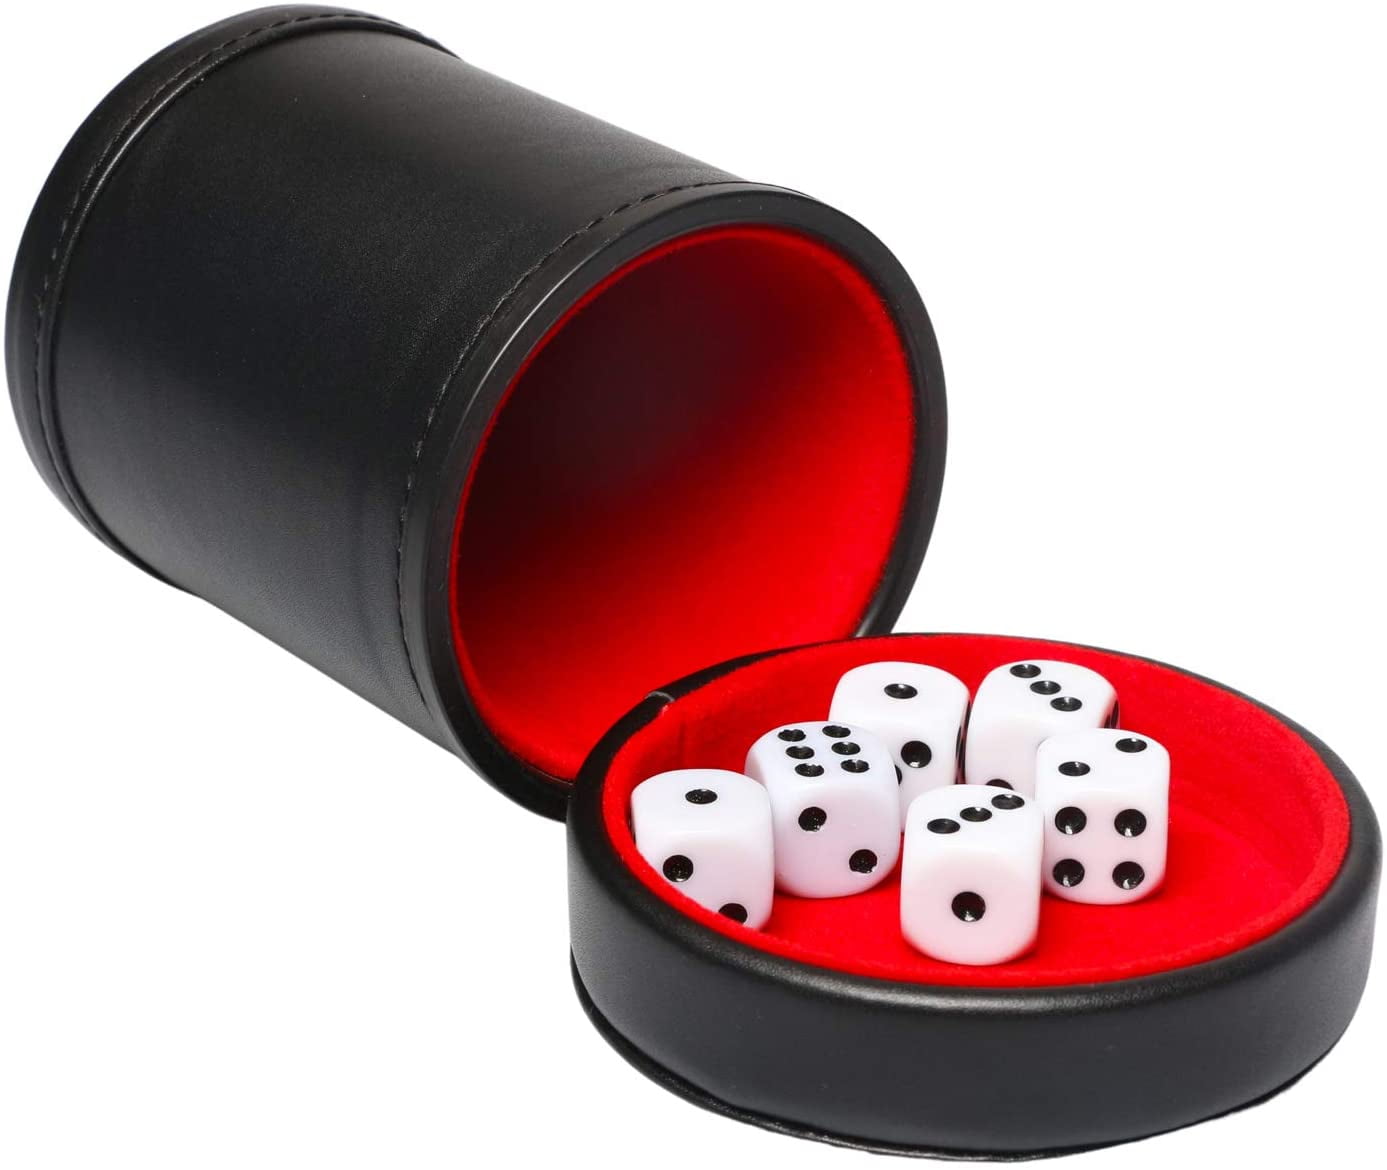 RERIVER Leather Dice Cup Set Felt Lining Quiet Shaker with 5 Dot Dices for 2 675663200786 